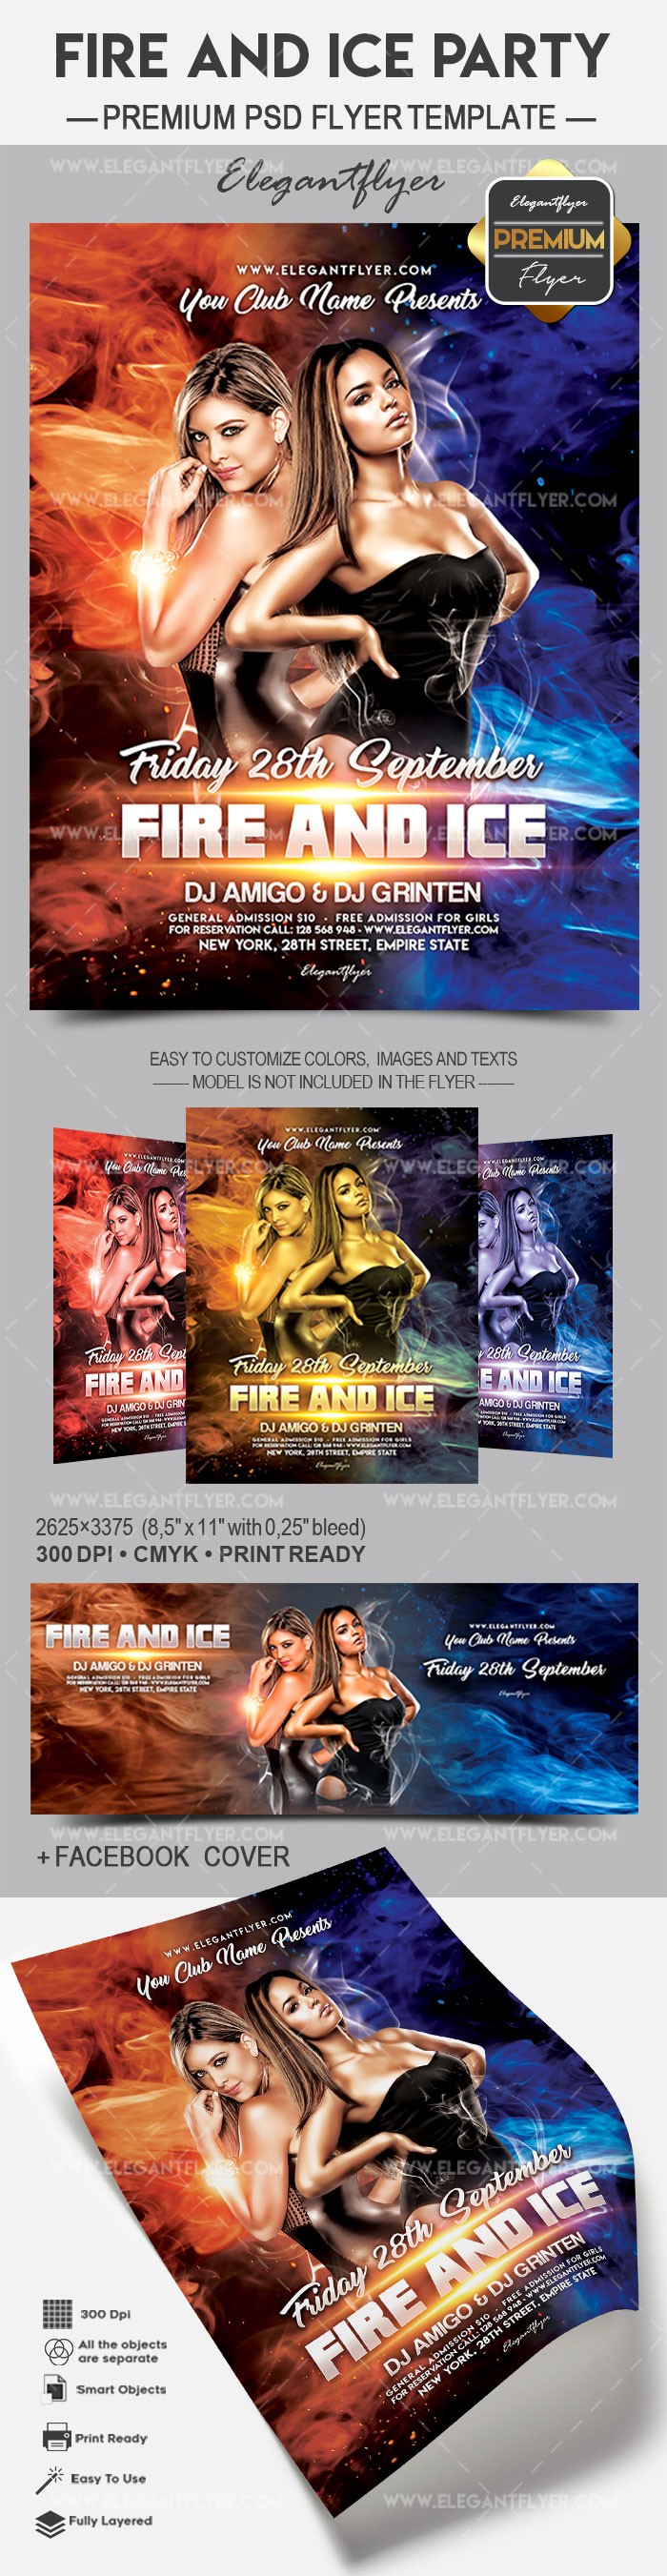 Fire and Ice Party by ElegantFlyer